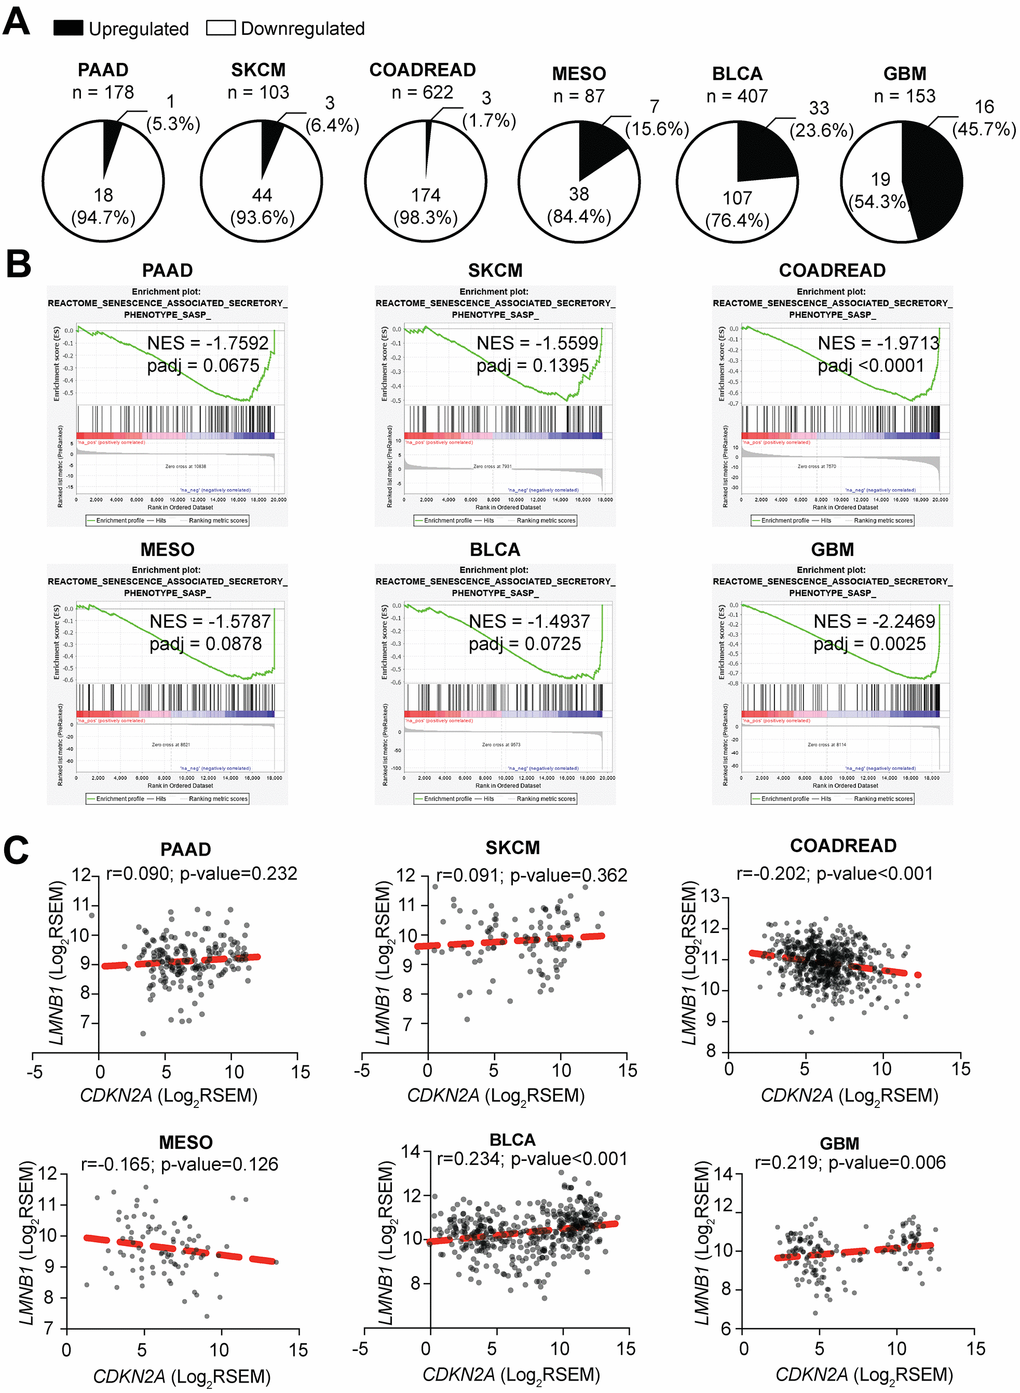 Tumors with low CDKN2A expression have decreased expression of SASP. (A) Percentage of SASP genes significantly upregulated and downregulated in CDKN2A-low (i.e., p16-low) expressing tumors when compared to CDKN2A-high (i.e., p16-high) expressing tumors. (B) Negatively enriched SASP term among the six studied tumor types in Gene Set Enrichment Analysis (GSEA) between CDKN2A-low and CDKN2A-high expressing tumors. SKCM (skin cutaneous melanoma), PAAD (pancreatic adenocarcinoma), COADREAD (colorectal adenocarcinoma), MESO (mesothelioma), BLCA (bladder urothelial carcinoma), GBM (glioblastoma multiforme), NES (negative enrichment score). (C) Correlation between CDKN2A and LMNB1 expression for each tumor type. Data are shown as Log2 of RSEM. Coefficient of correlation (r) and p-value were calculated using Pearson’s correlation.